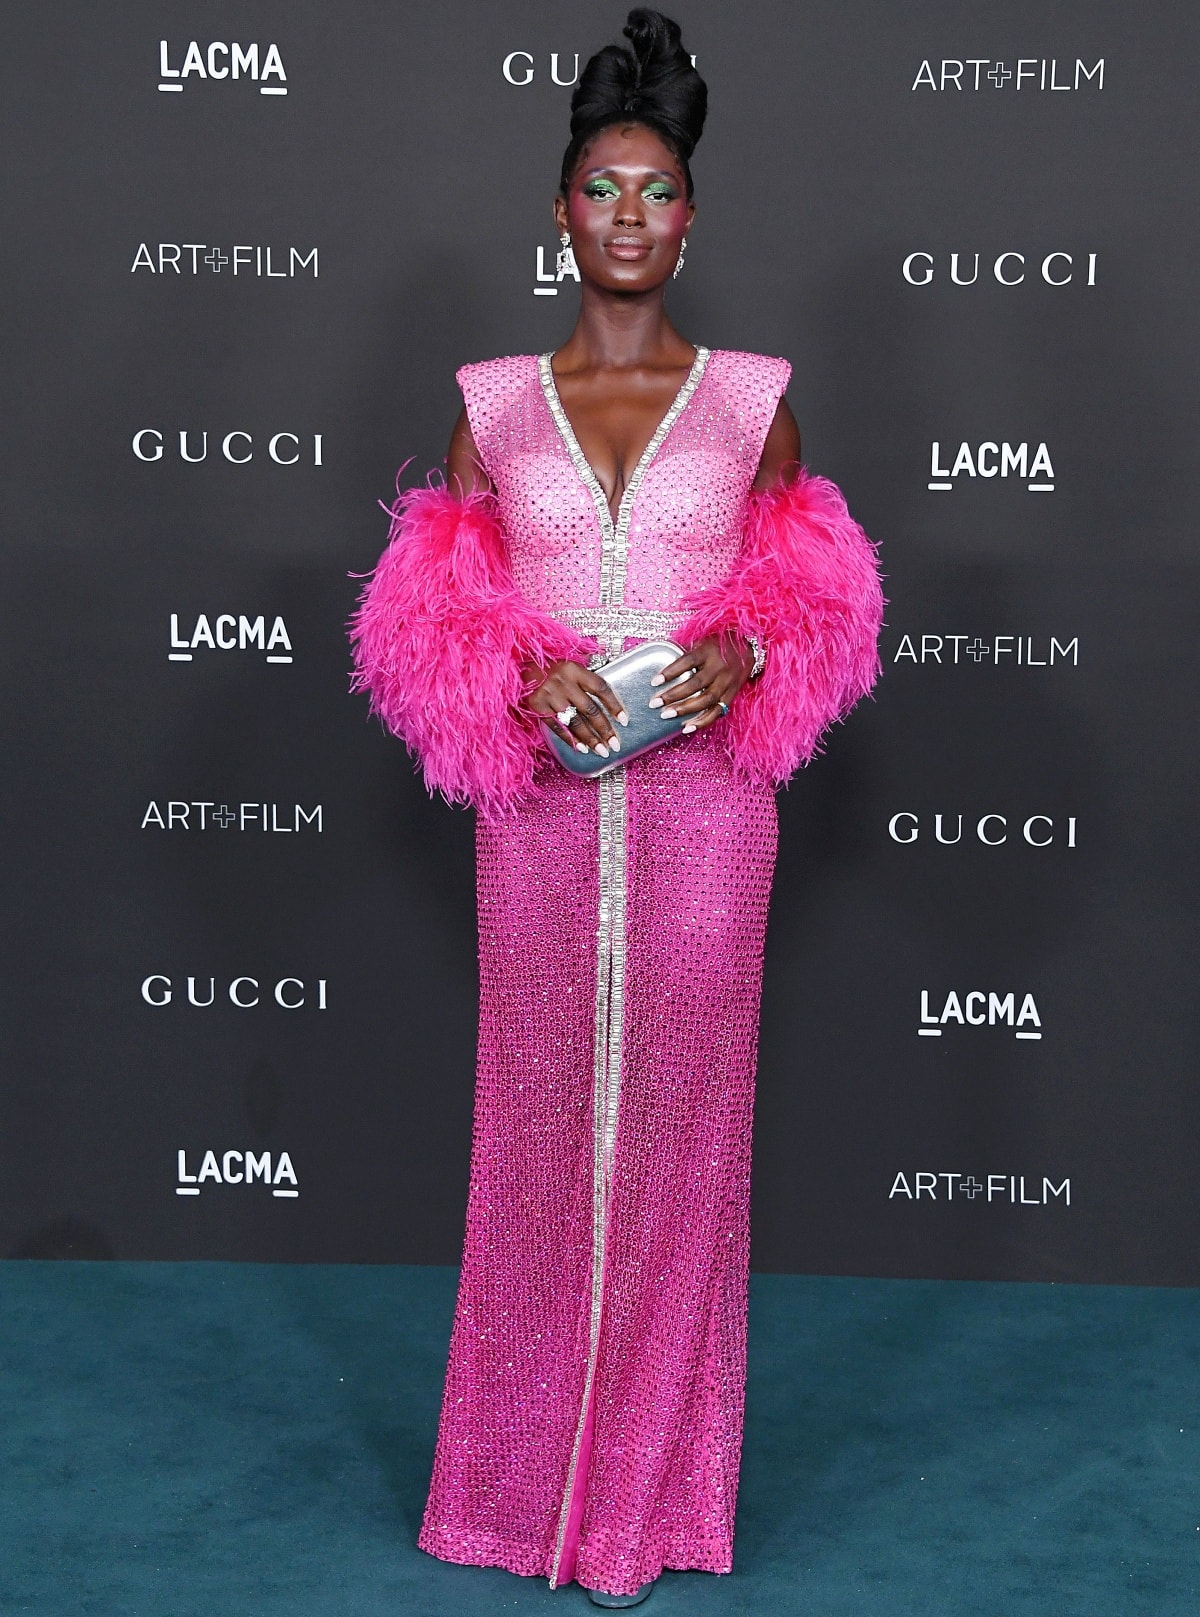 Jodie Turner-Smith attended the 10th Annual LACMA Art + Film Gala